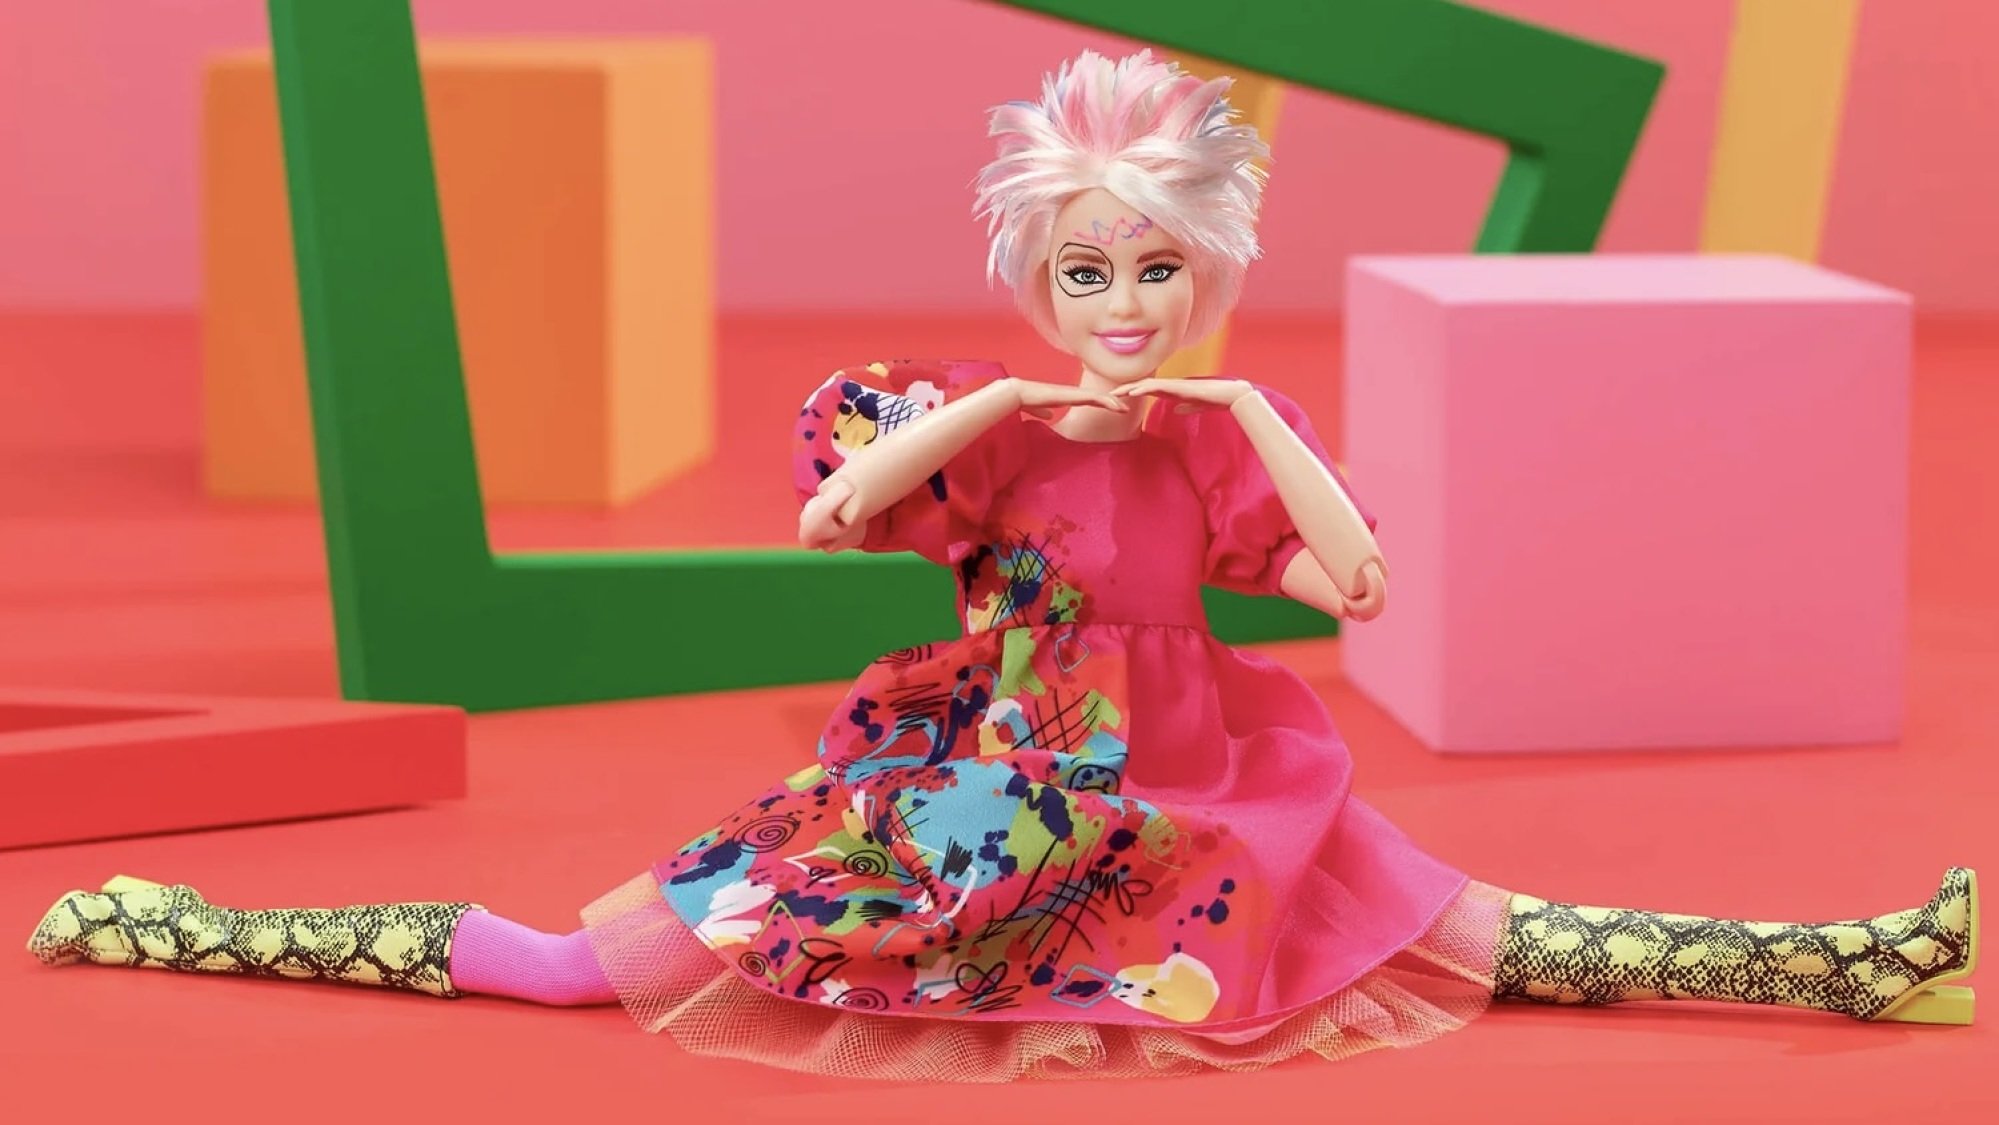 A Barbie doll in the splits; she has choppy, short blonde hair, a pink dress, green snakeskin boots, and crayon drawings all over here face.